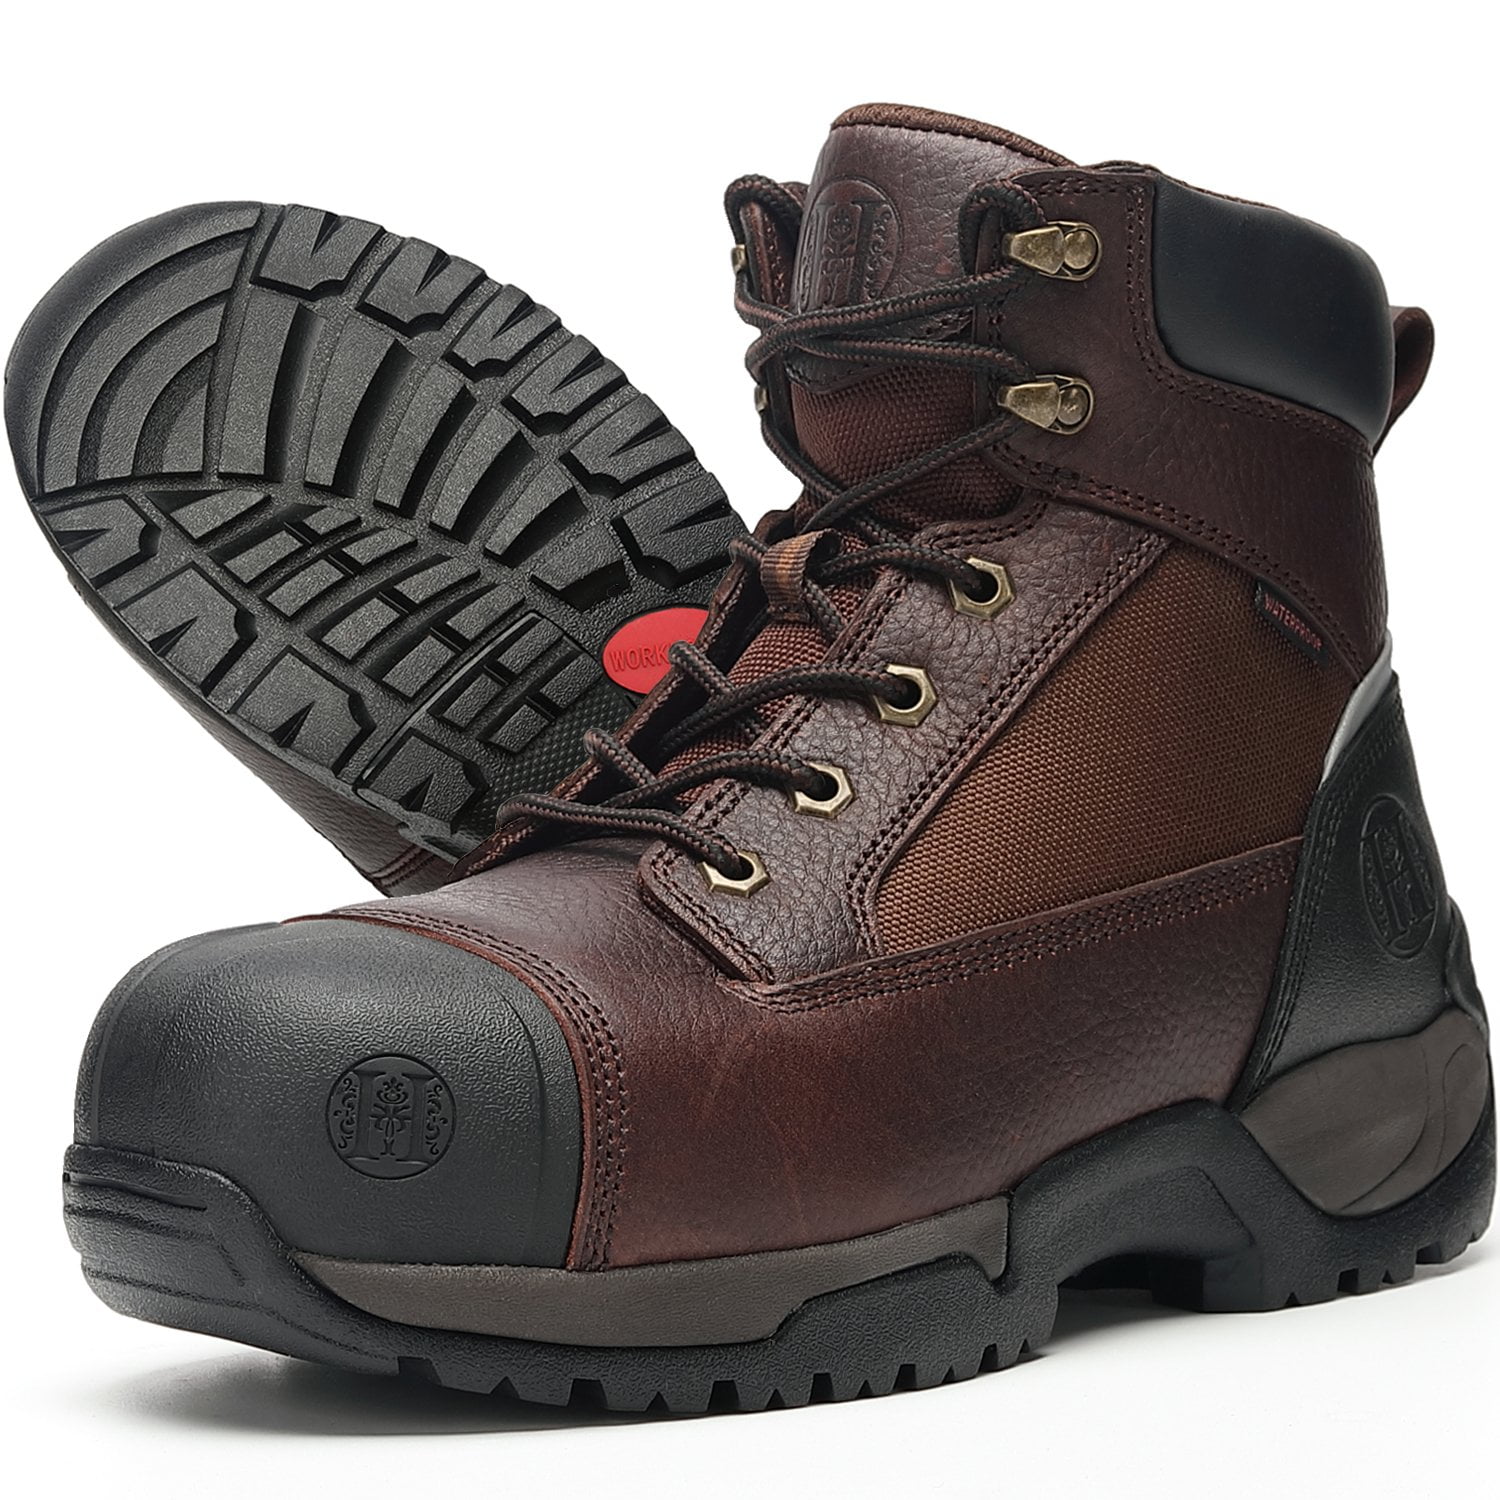 Details about   Mens Safety Lace Up Steel Toe Midsole Ankle Work Boots Waterproof Shoes Size 